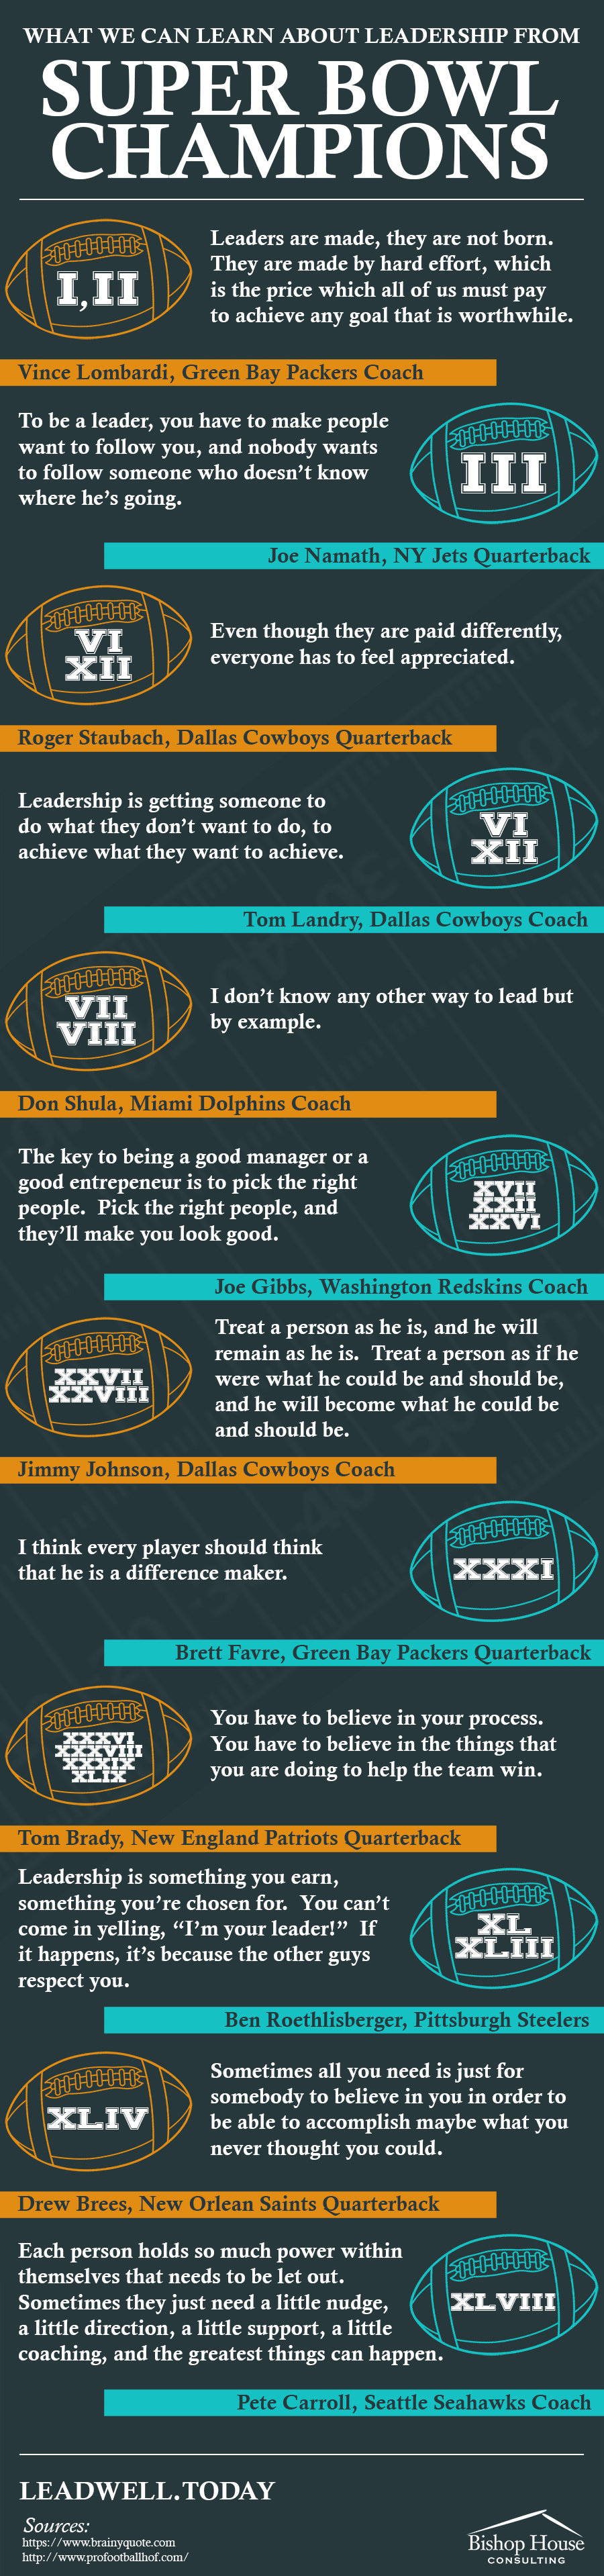 NFL Super Bowl Champion Leadership Quotes Infographic